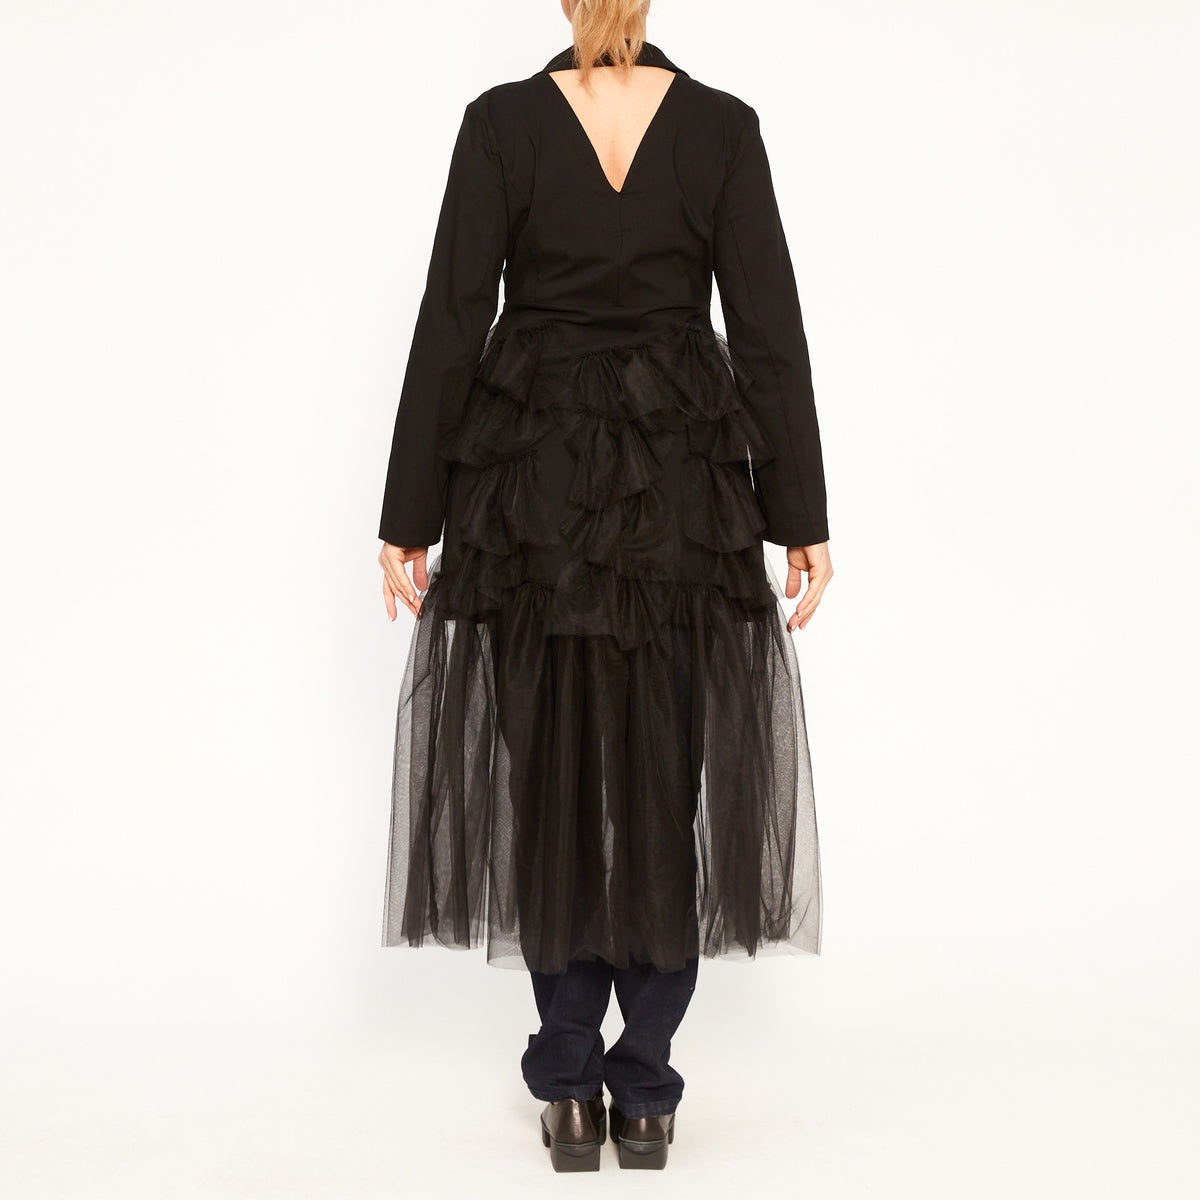 The Tulle Jacket